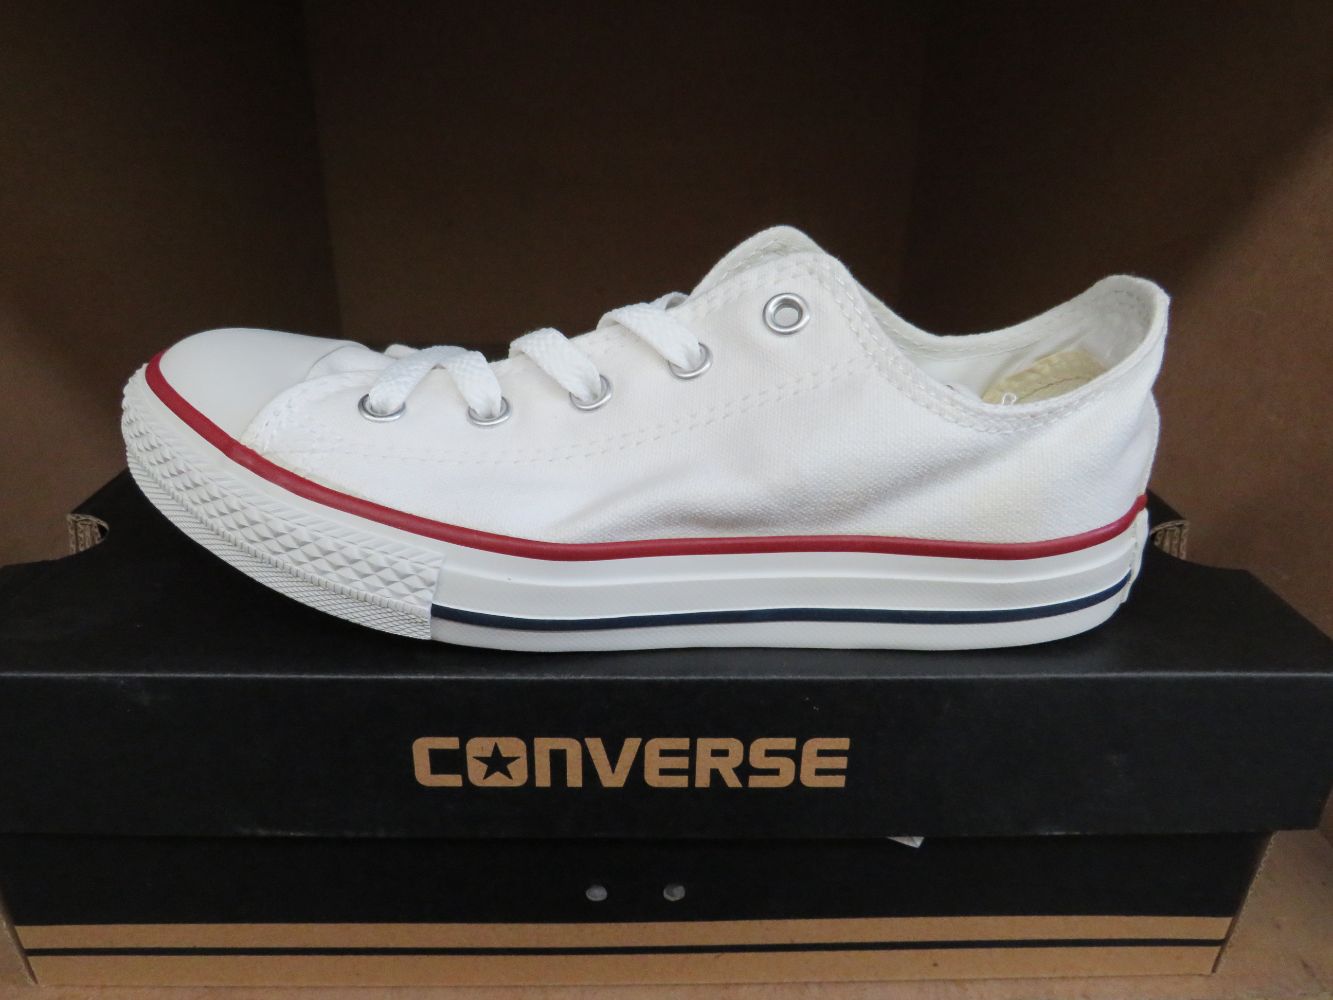 Last Few Lots of Brand New Converse Trainers